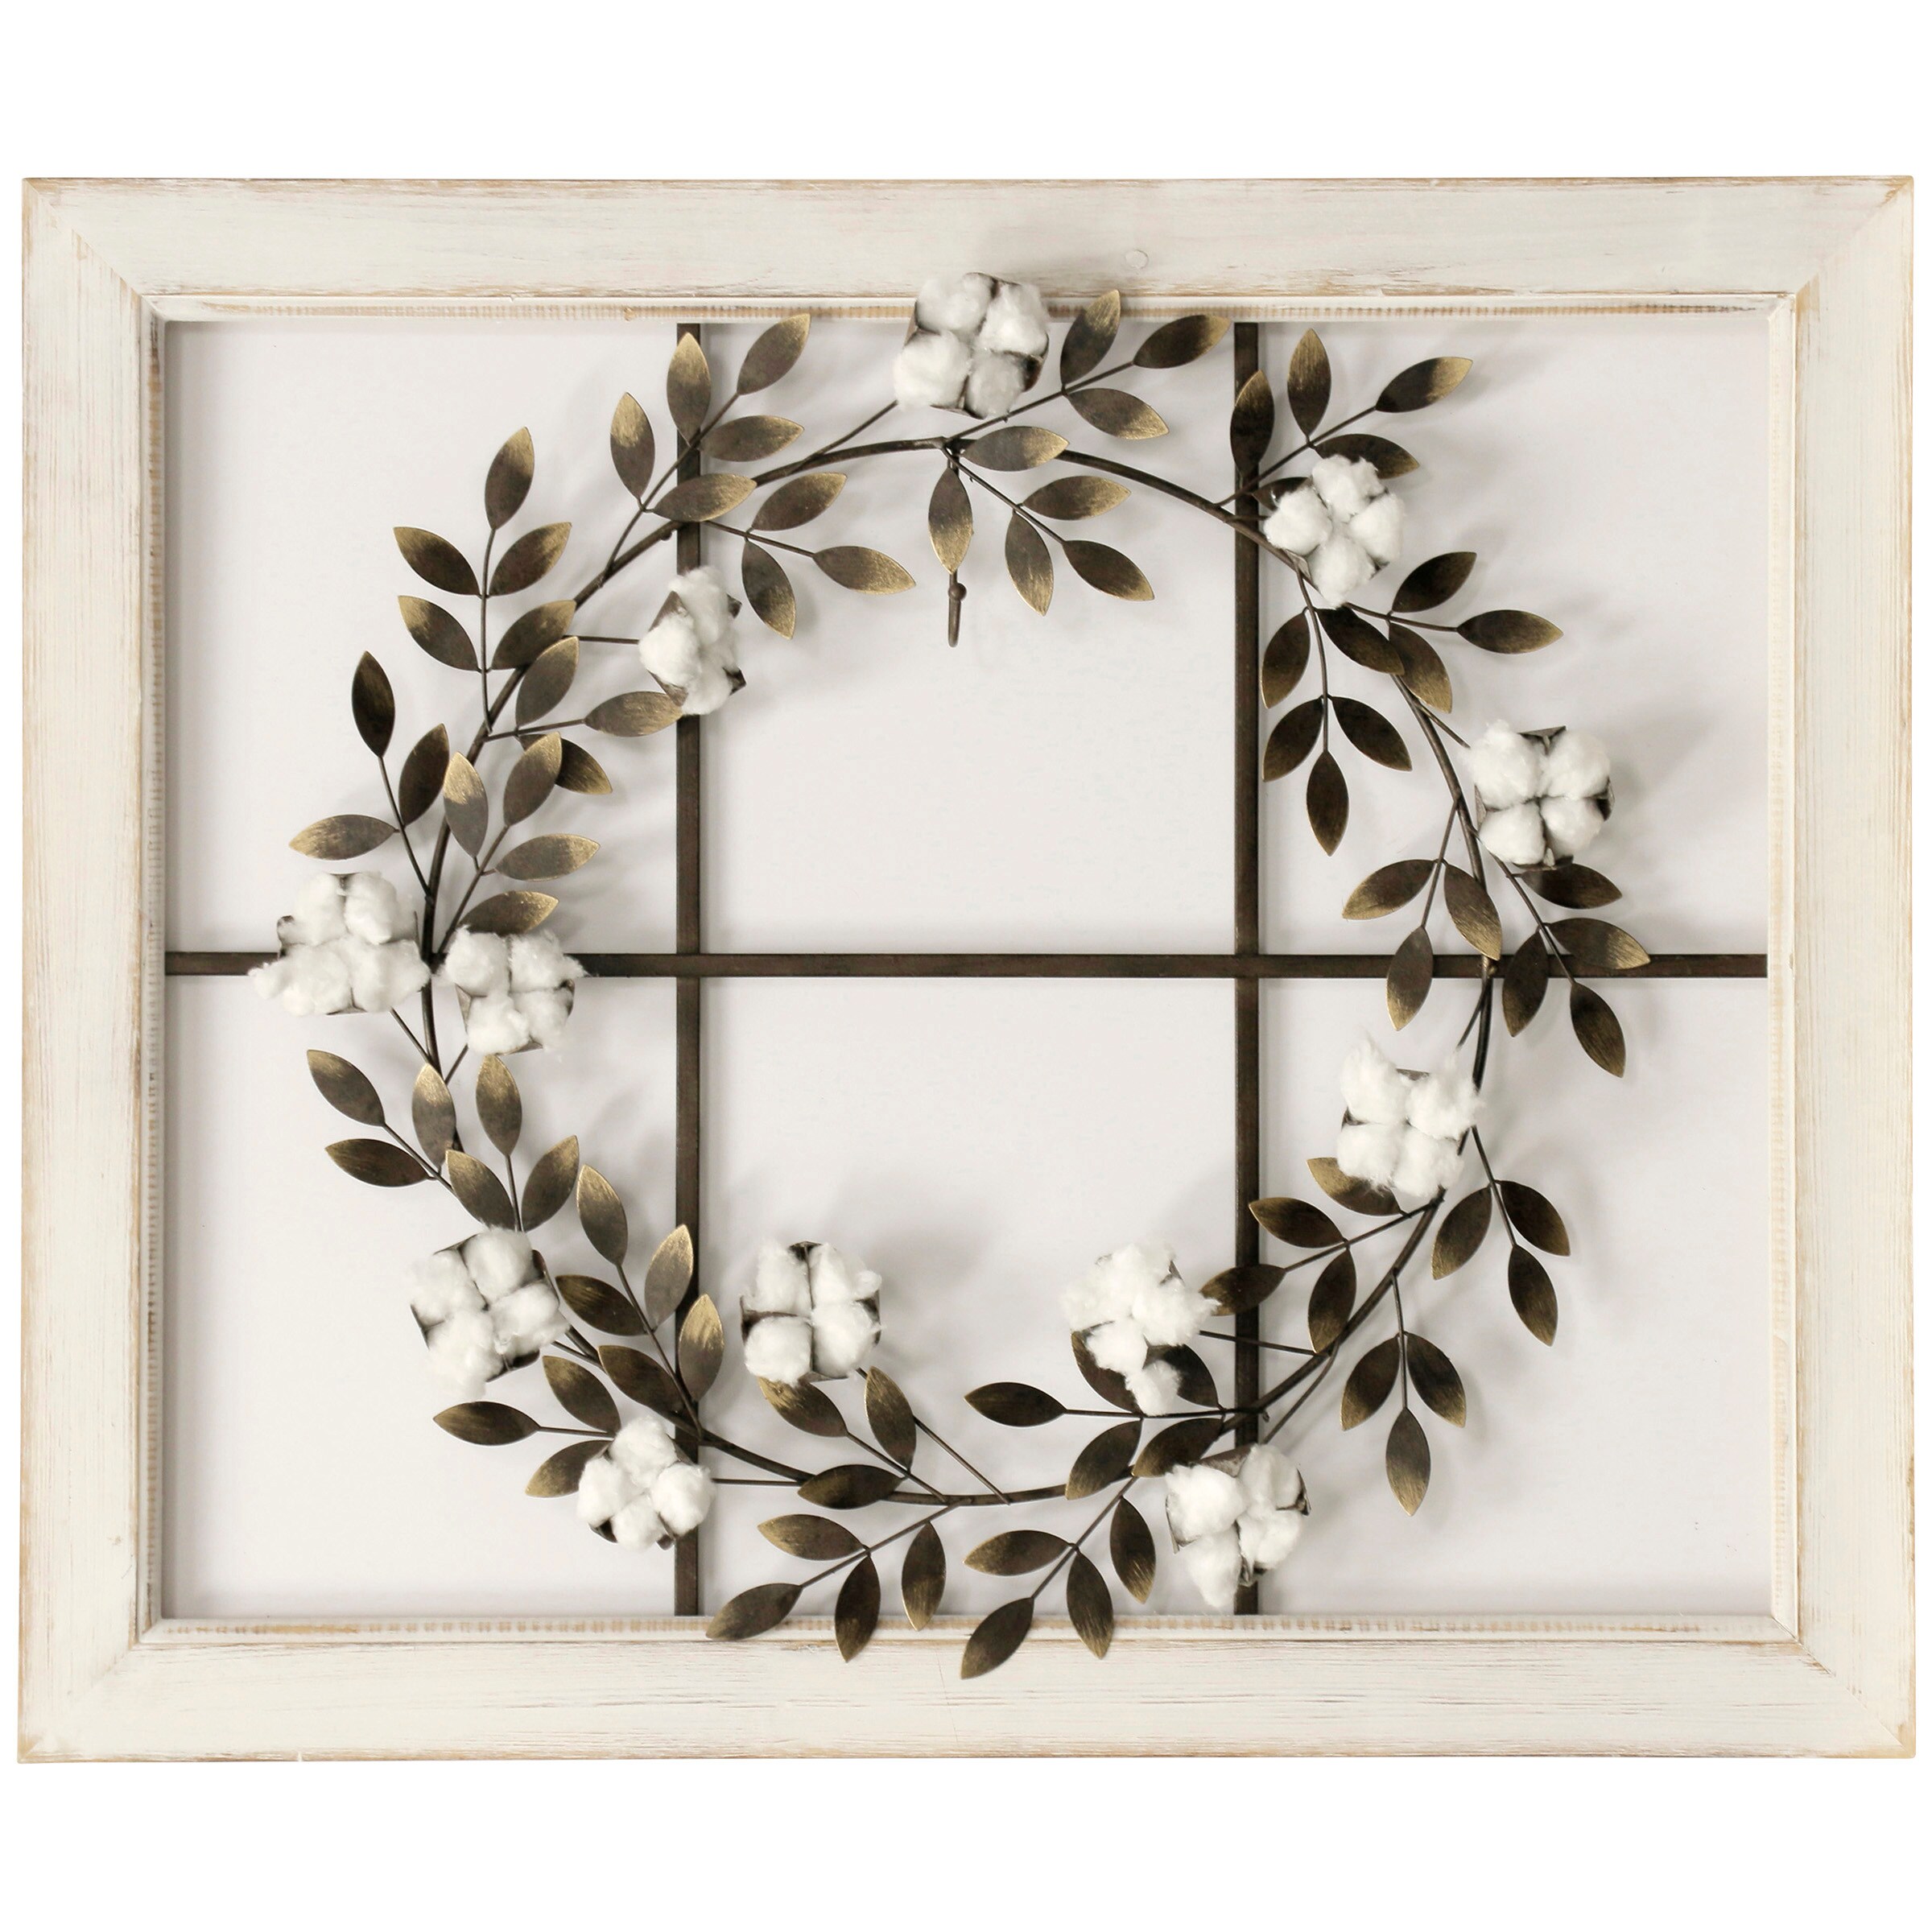 6" CENTER D FLORAL ACCENT WREATH RUSTY METAL STARS 11" OUTSIDE D 